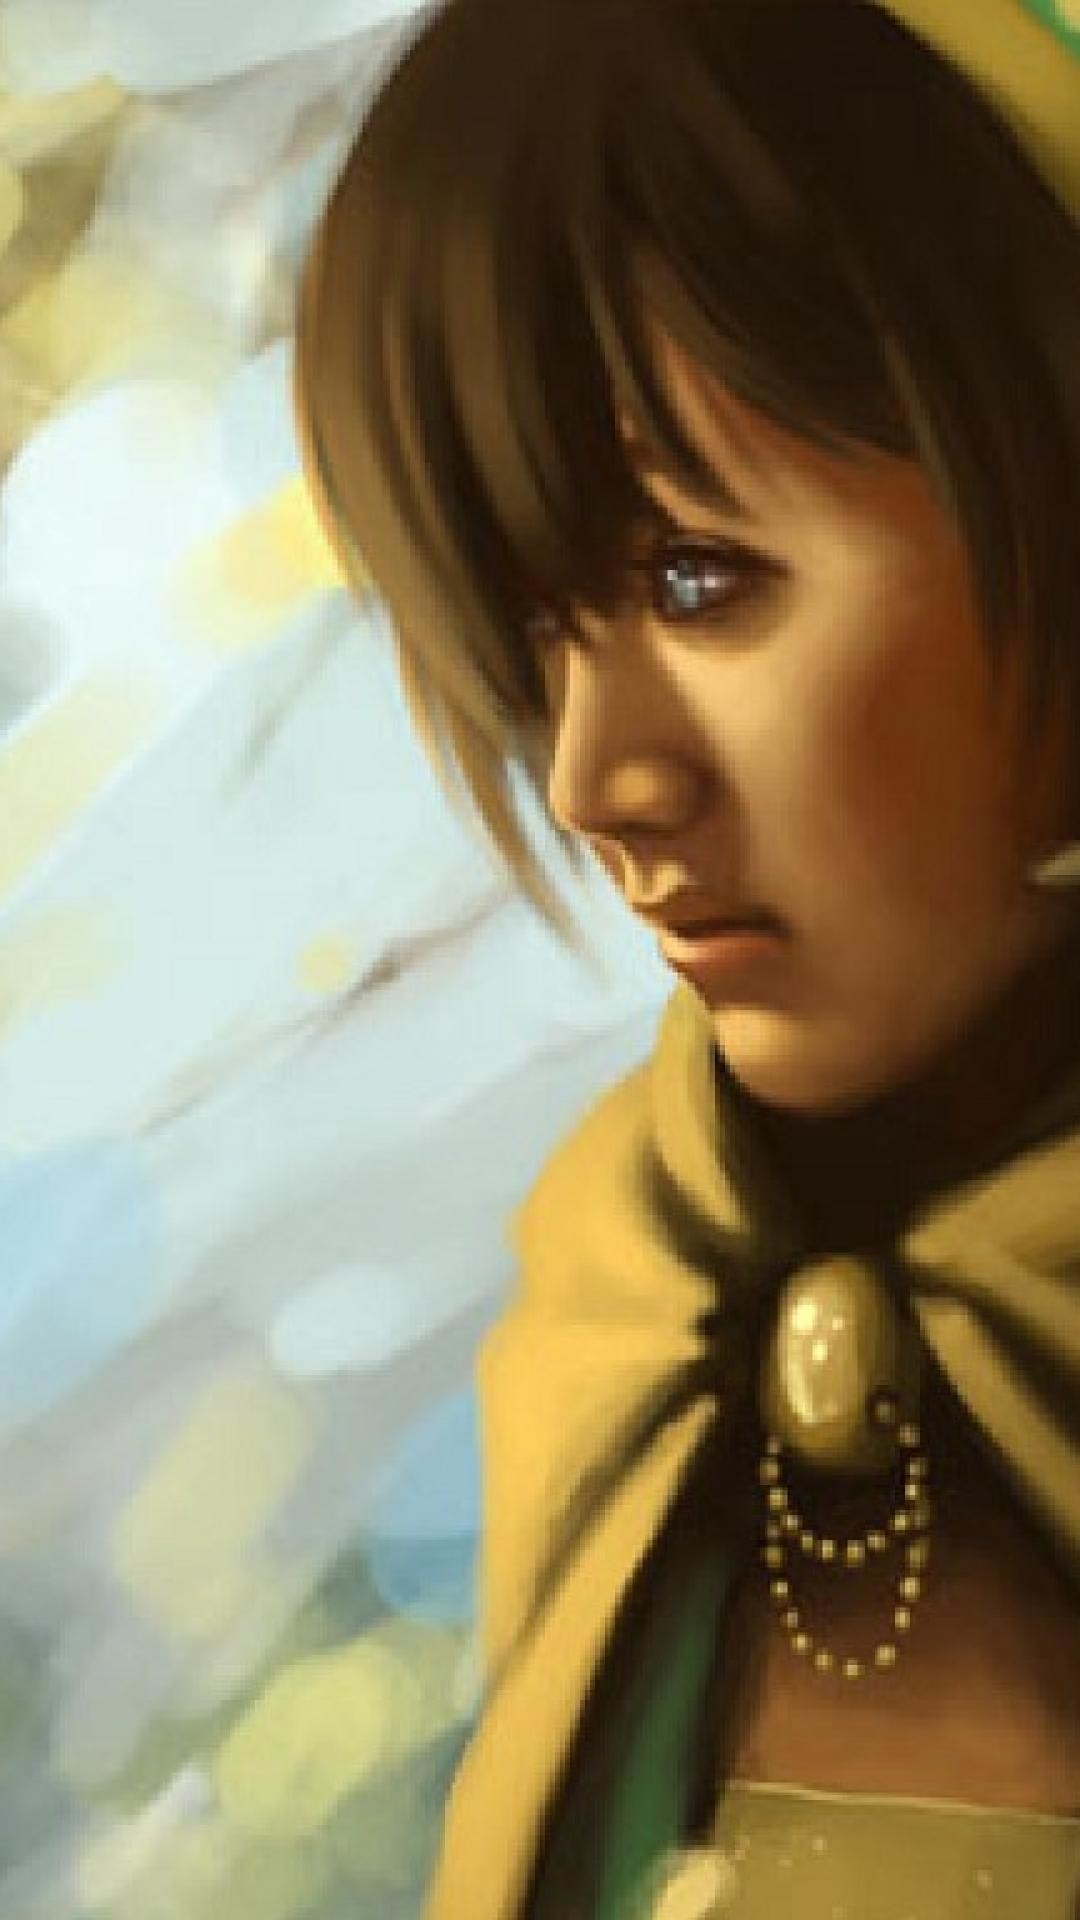 1080x1920 wallpaper.wiki-Toph-Avatar-The-Last-Airbender-Background-